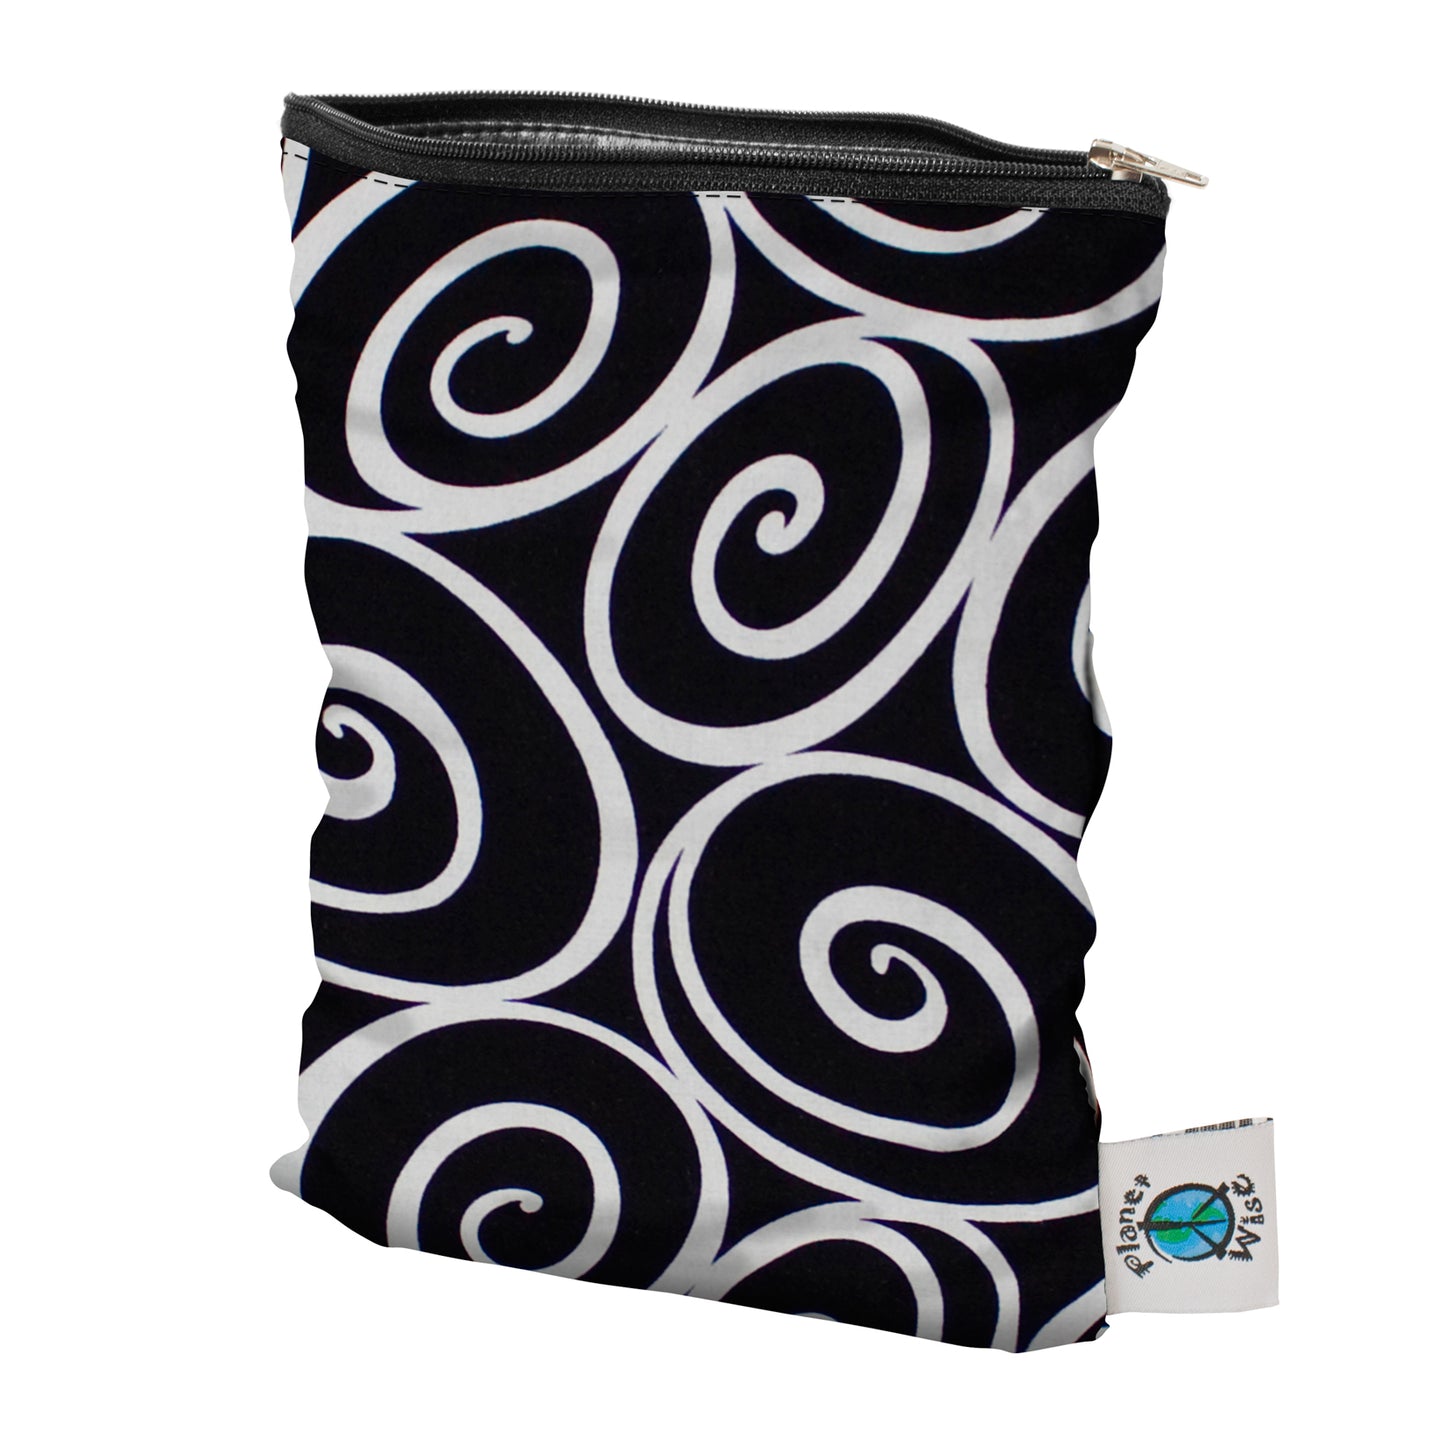 Planet Wise Wet Bag - Small 7.5" x 10"